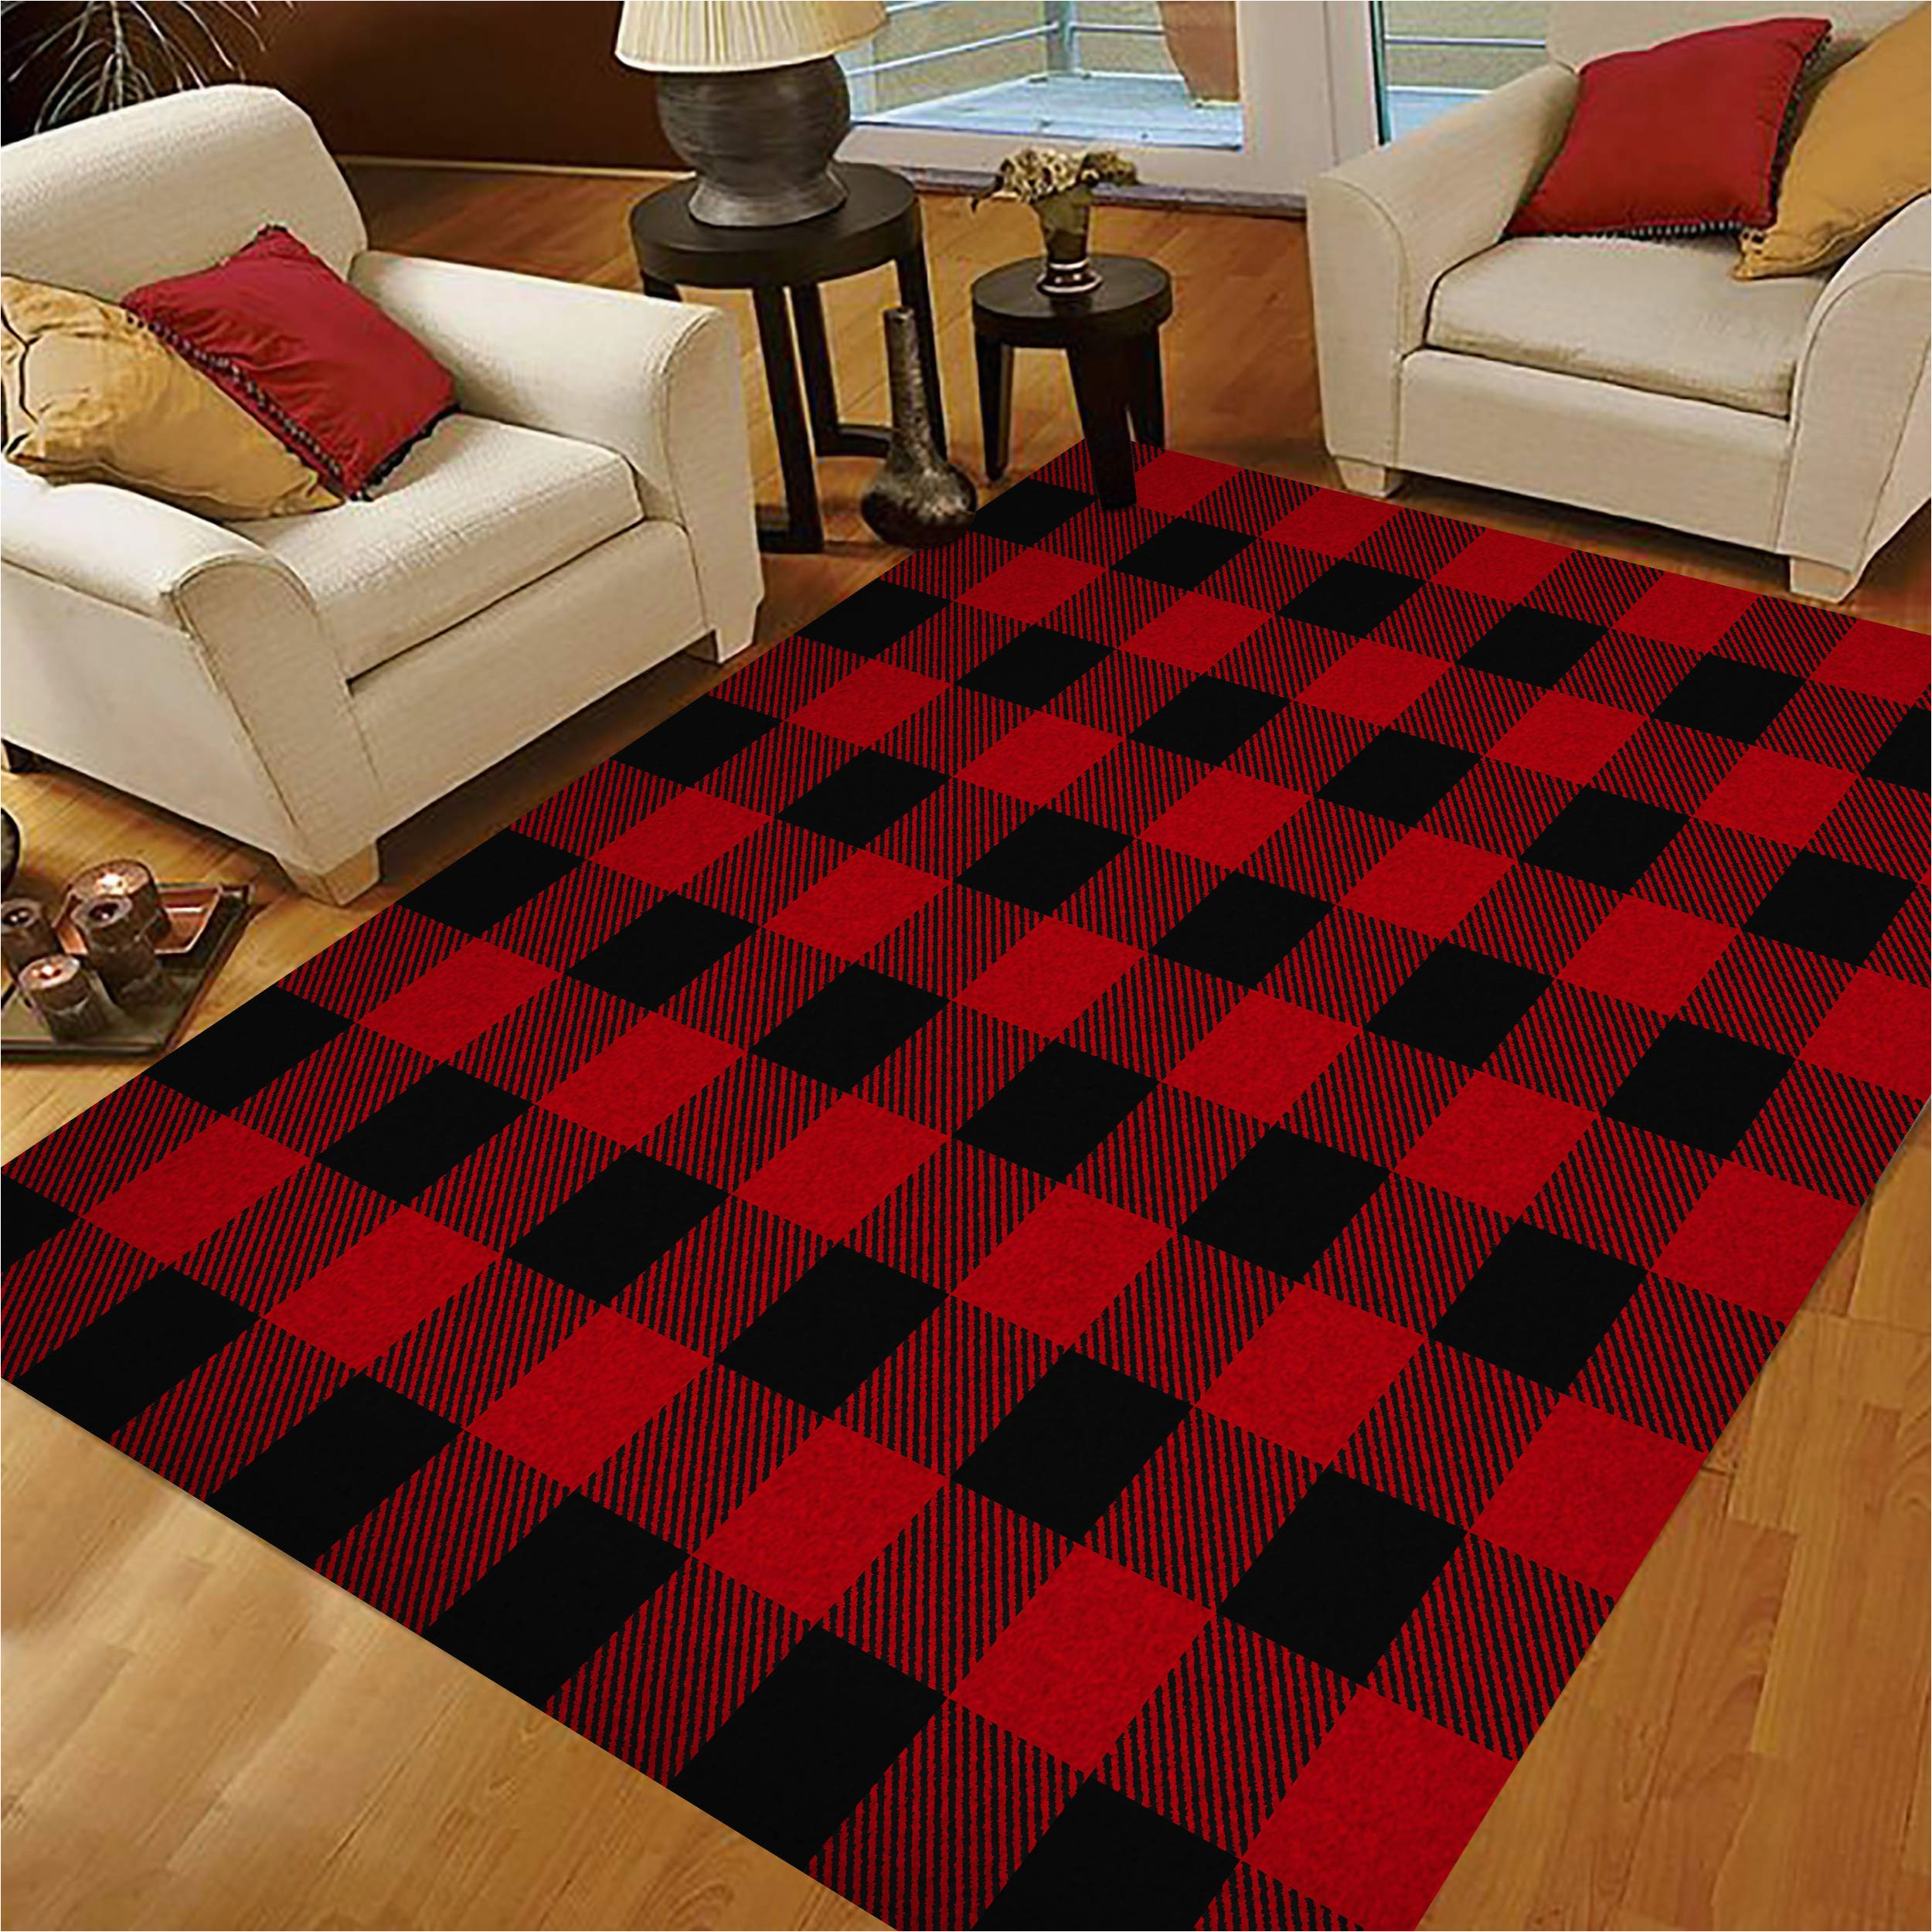 5 X 7 Red area Rug Christmas area Rugs, area Rugs 5×7 for Living Room Bedroom Home Decorative Merry Christmas Red Black Buffalo Plaid